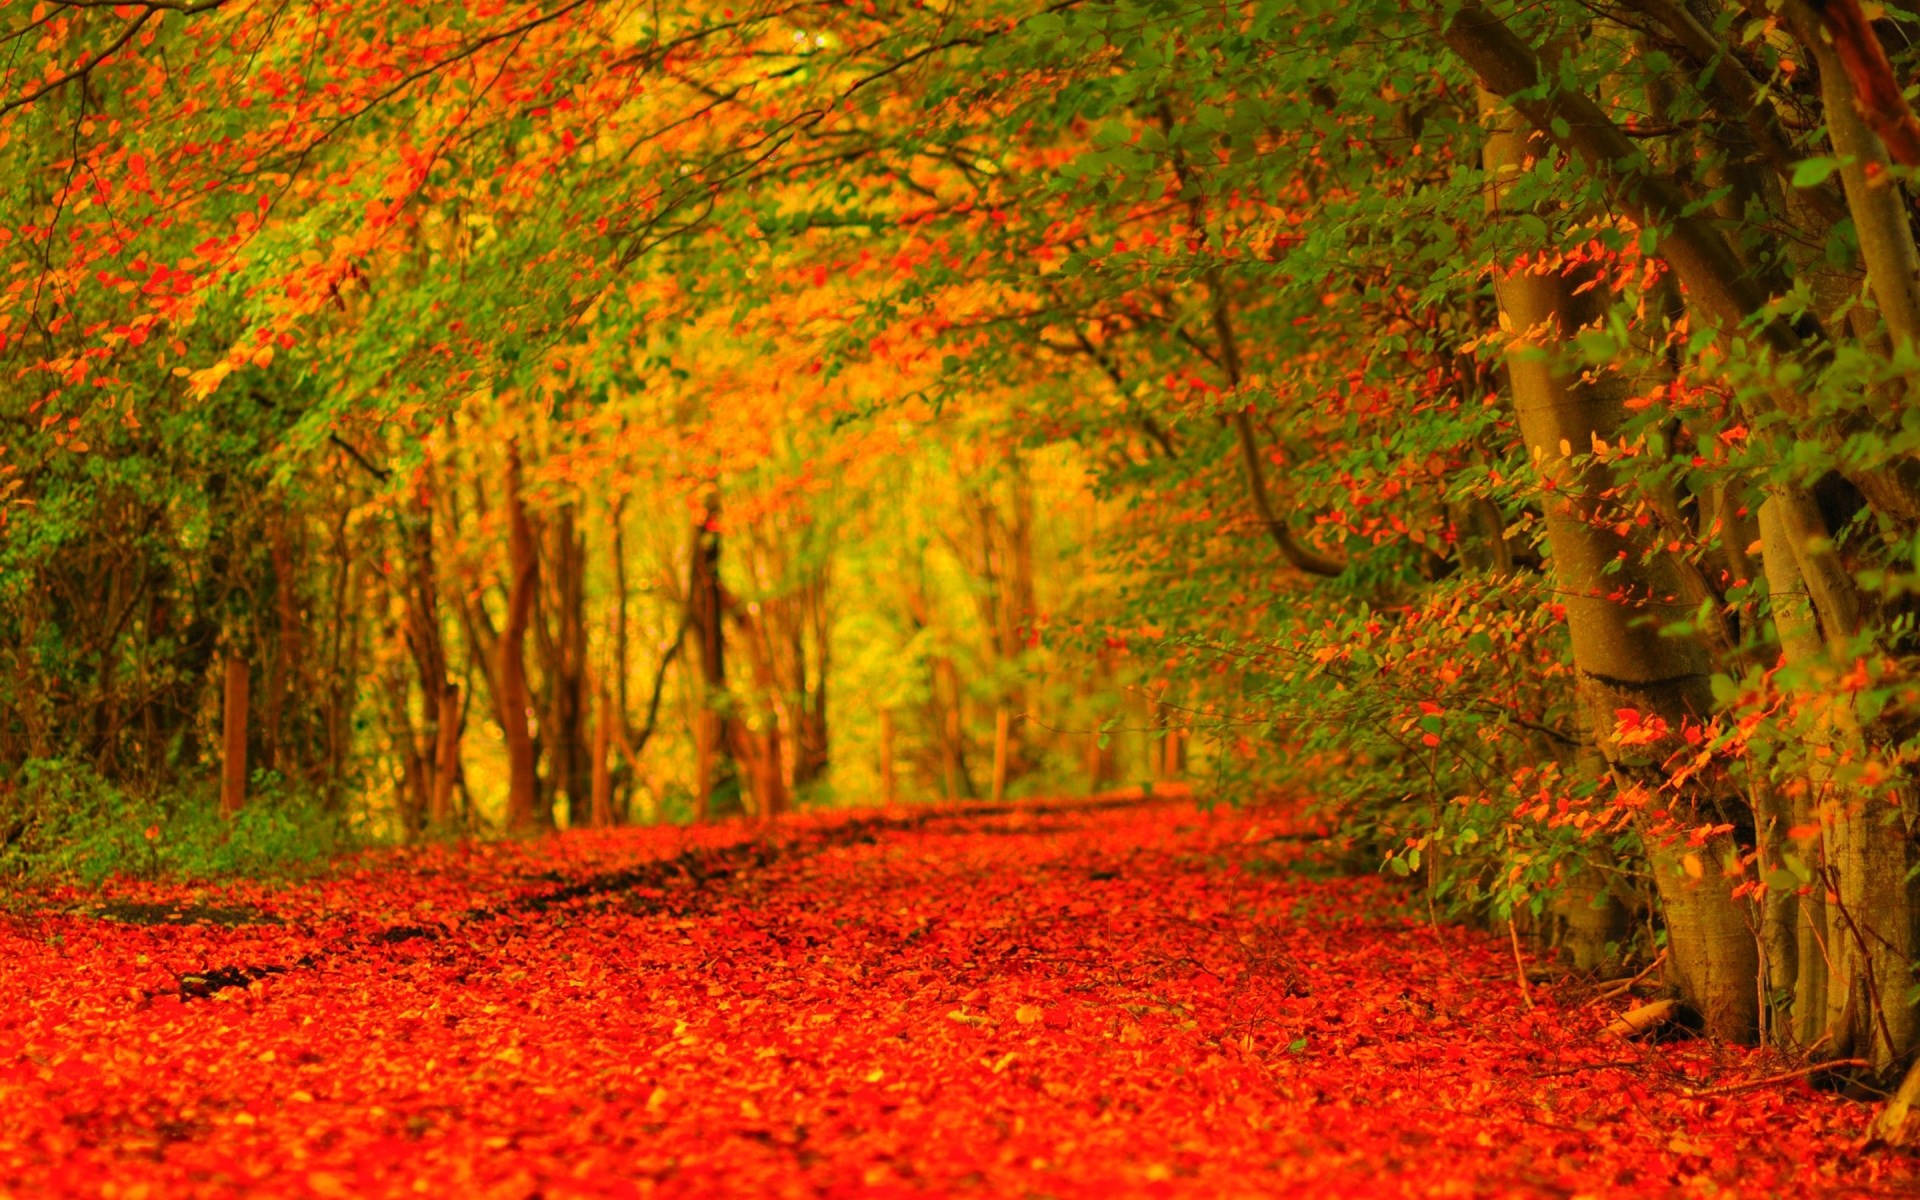 Fall desktop background pictures free sharovarka Pinterest Fall desktop backgrounds, Desktop background pictures and Desktop backgrounds